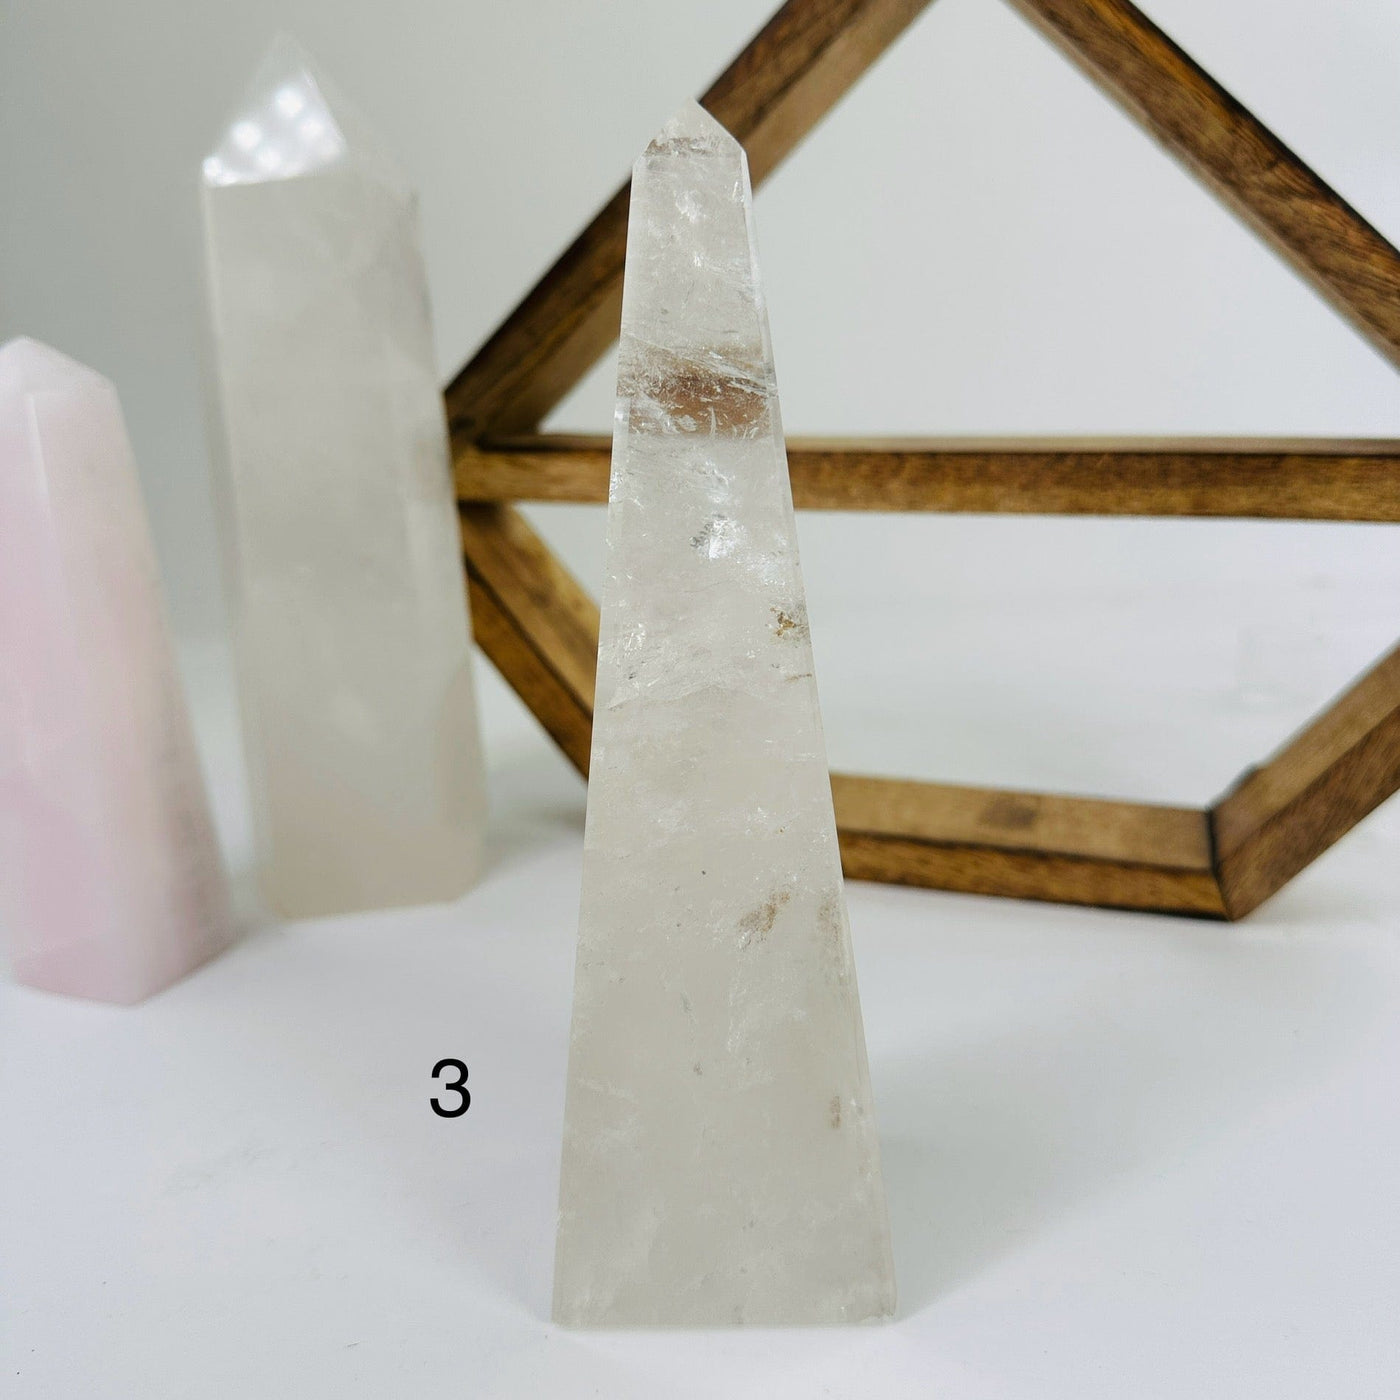 CRYSTAL QUARTZ OBELISK WITH DECORATIONS IN THE BACKGROUND